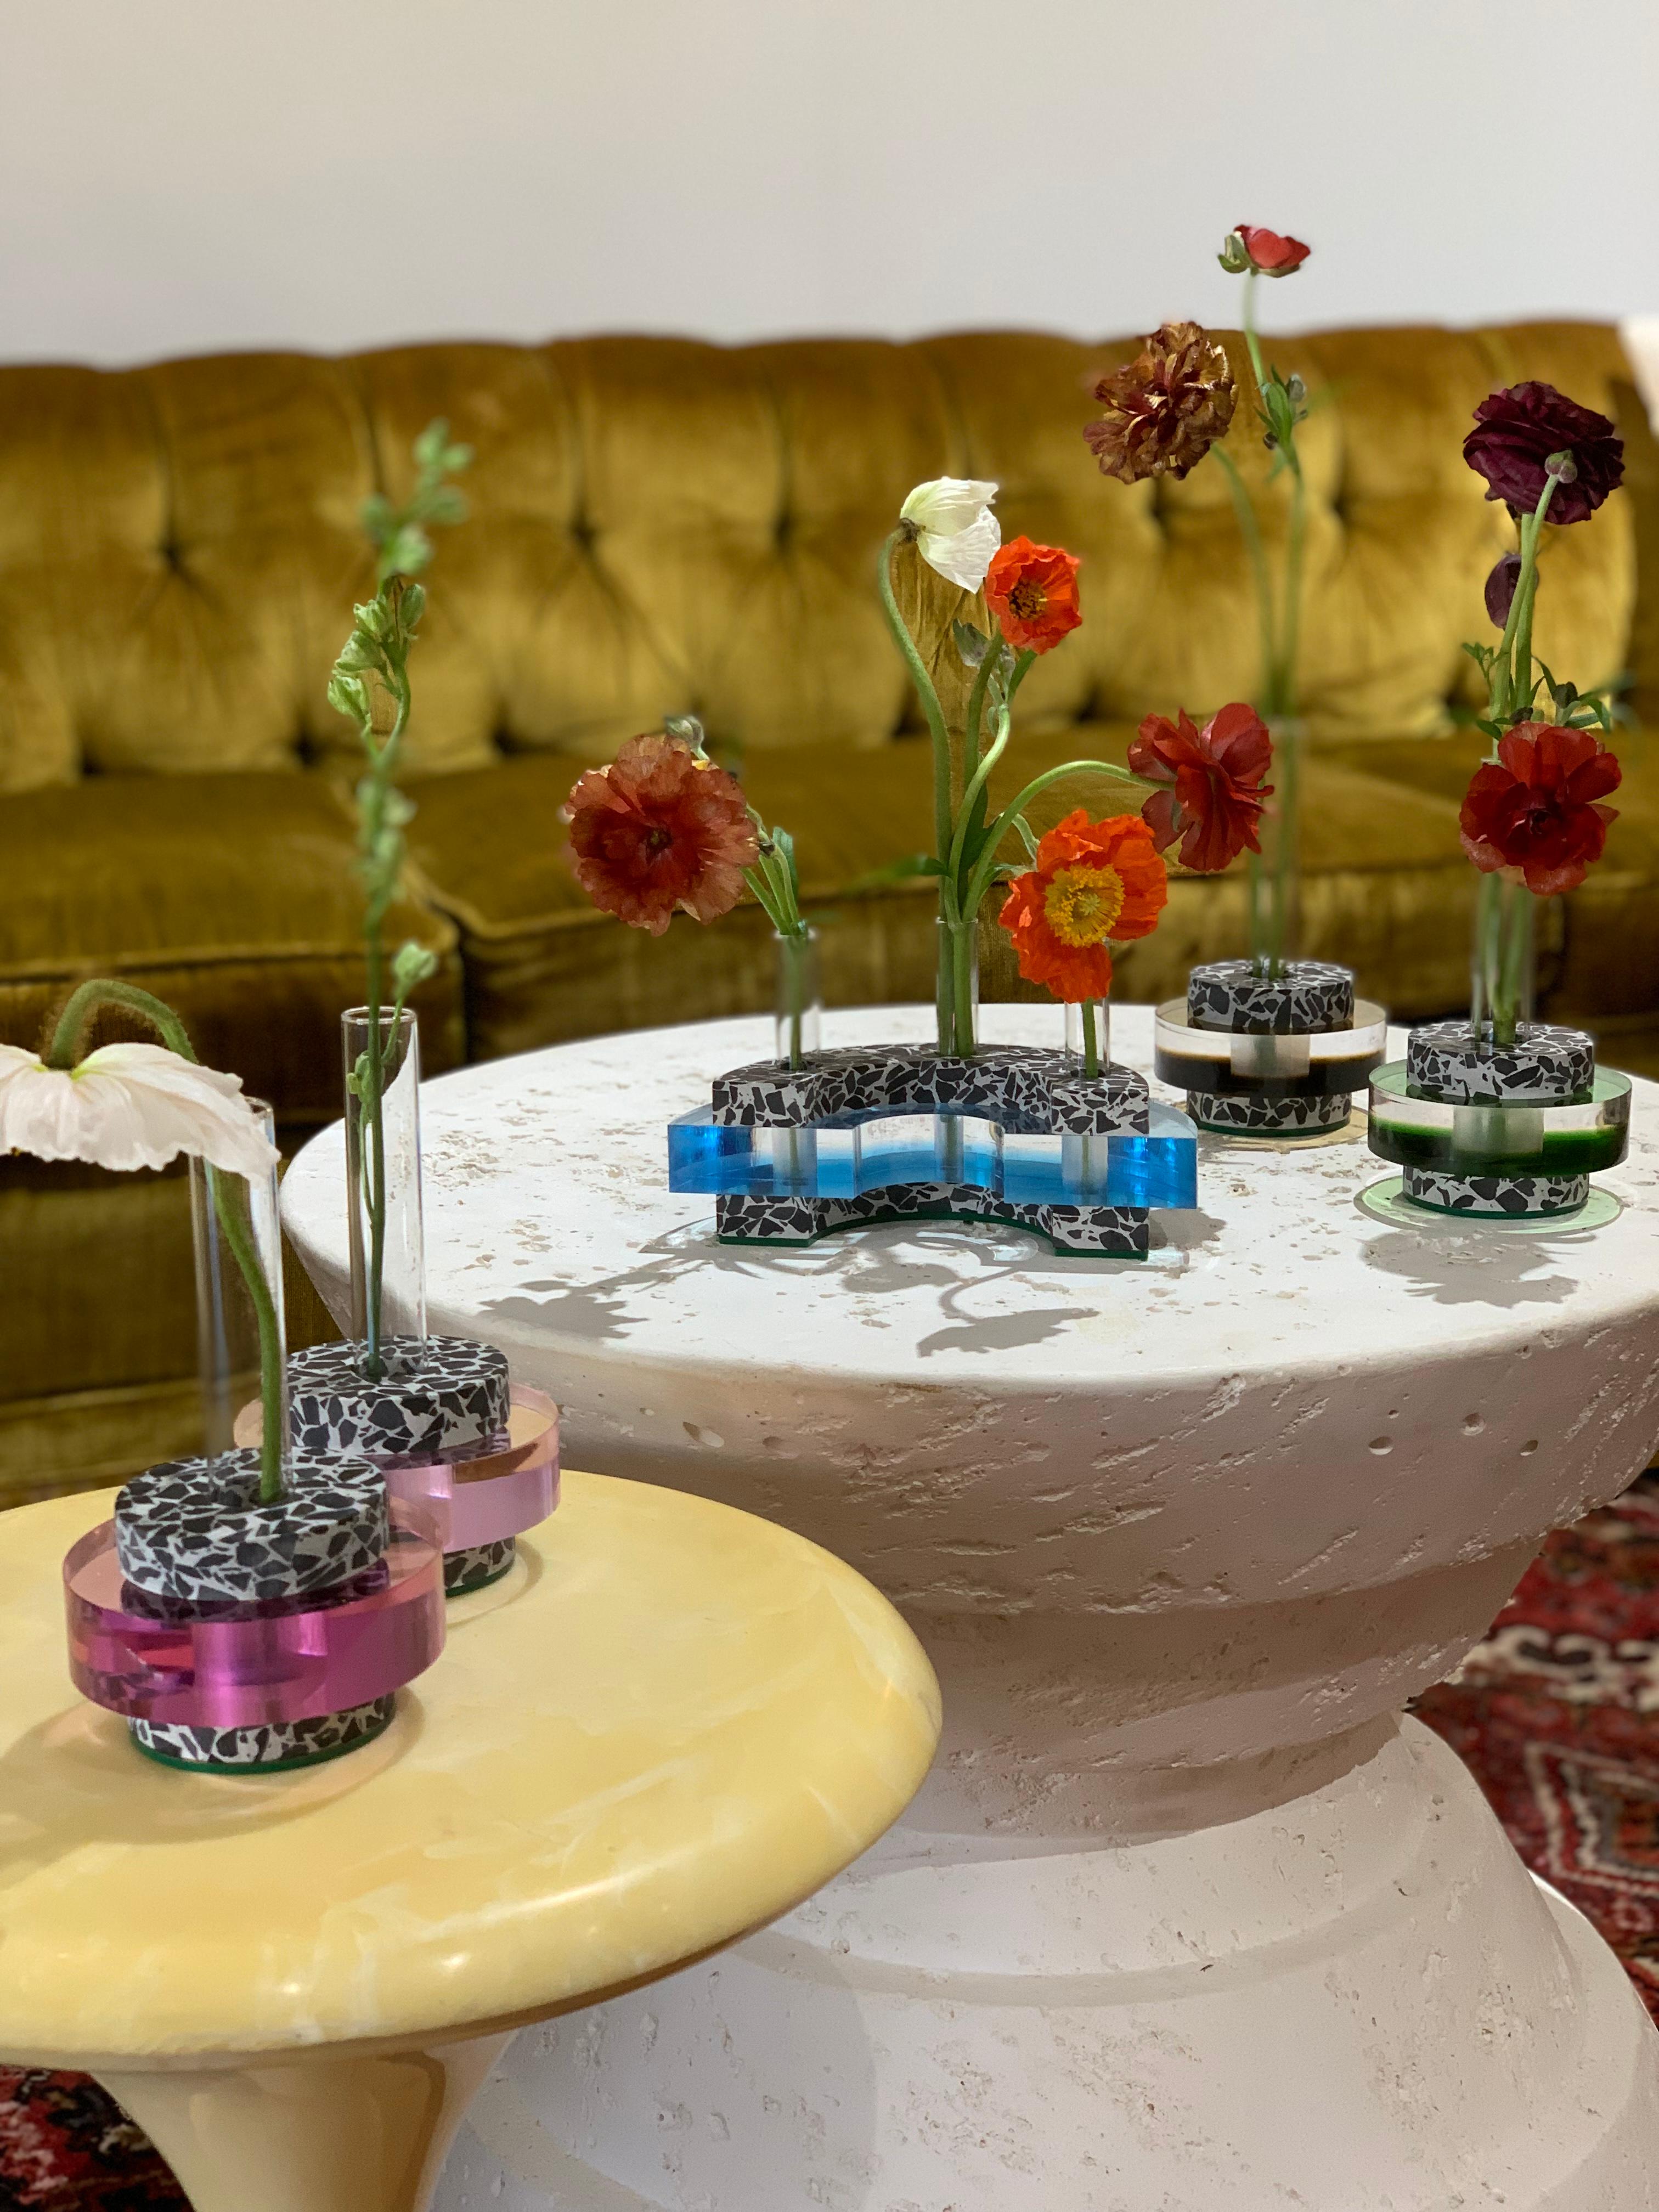 Gabriela has partnered with founder and curator Sara Darling of Rose colored to launch the floral shop’s inaugural artist series with Memphis, a show consisting of mini-sculptures inspired by postmodern Memphis Design and Miami’s Art Deco era. The